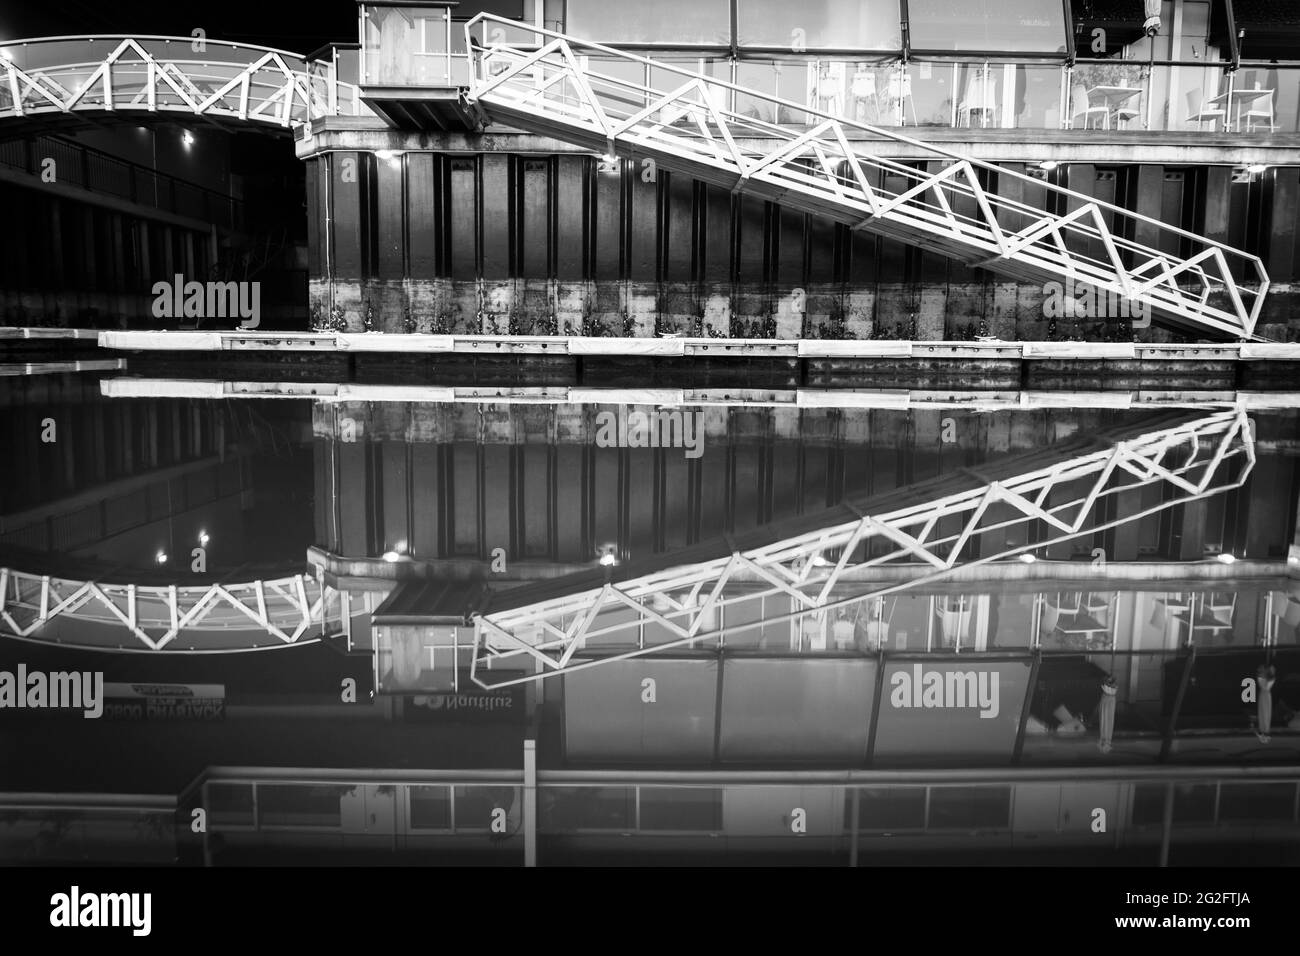 Calm water picks up pier access and apartment reflections in monochrome. Stock Photo